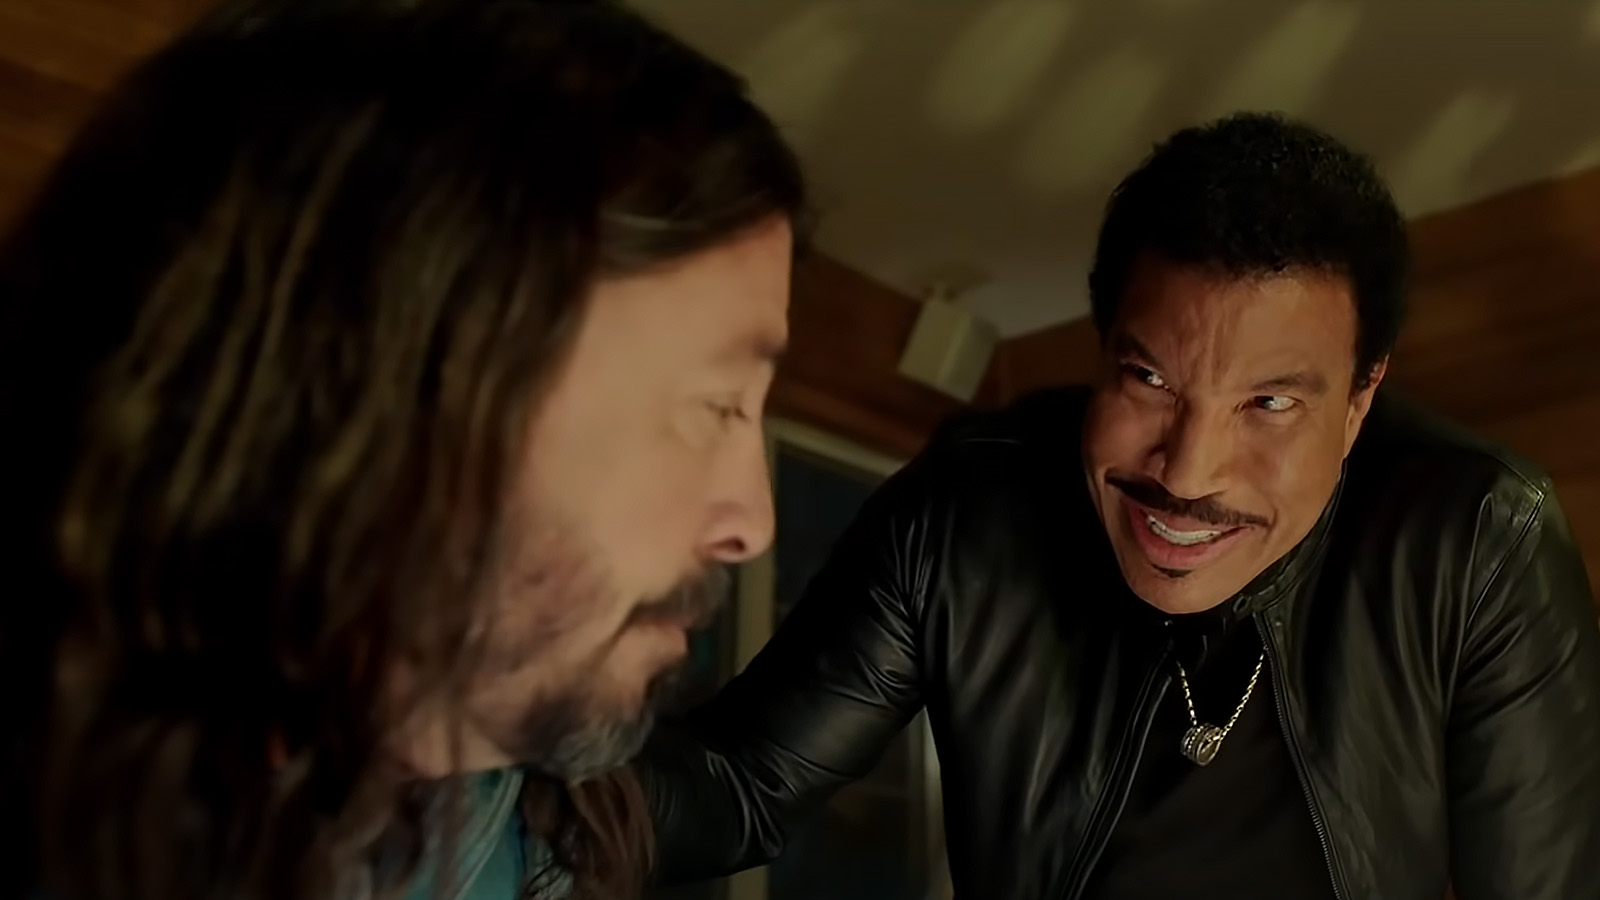 Lionel Richie is less than supportive in his Studio 666 cameo. Image © Sony Pictures